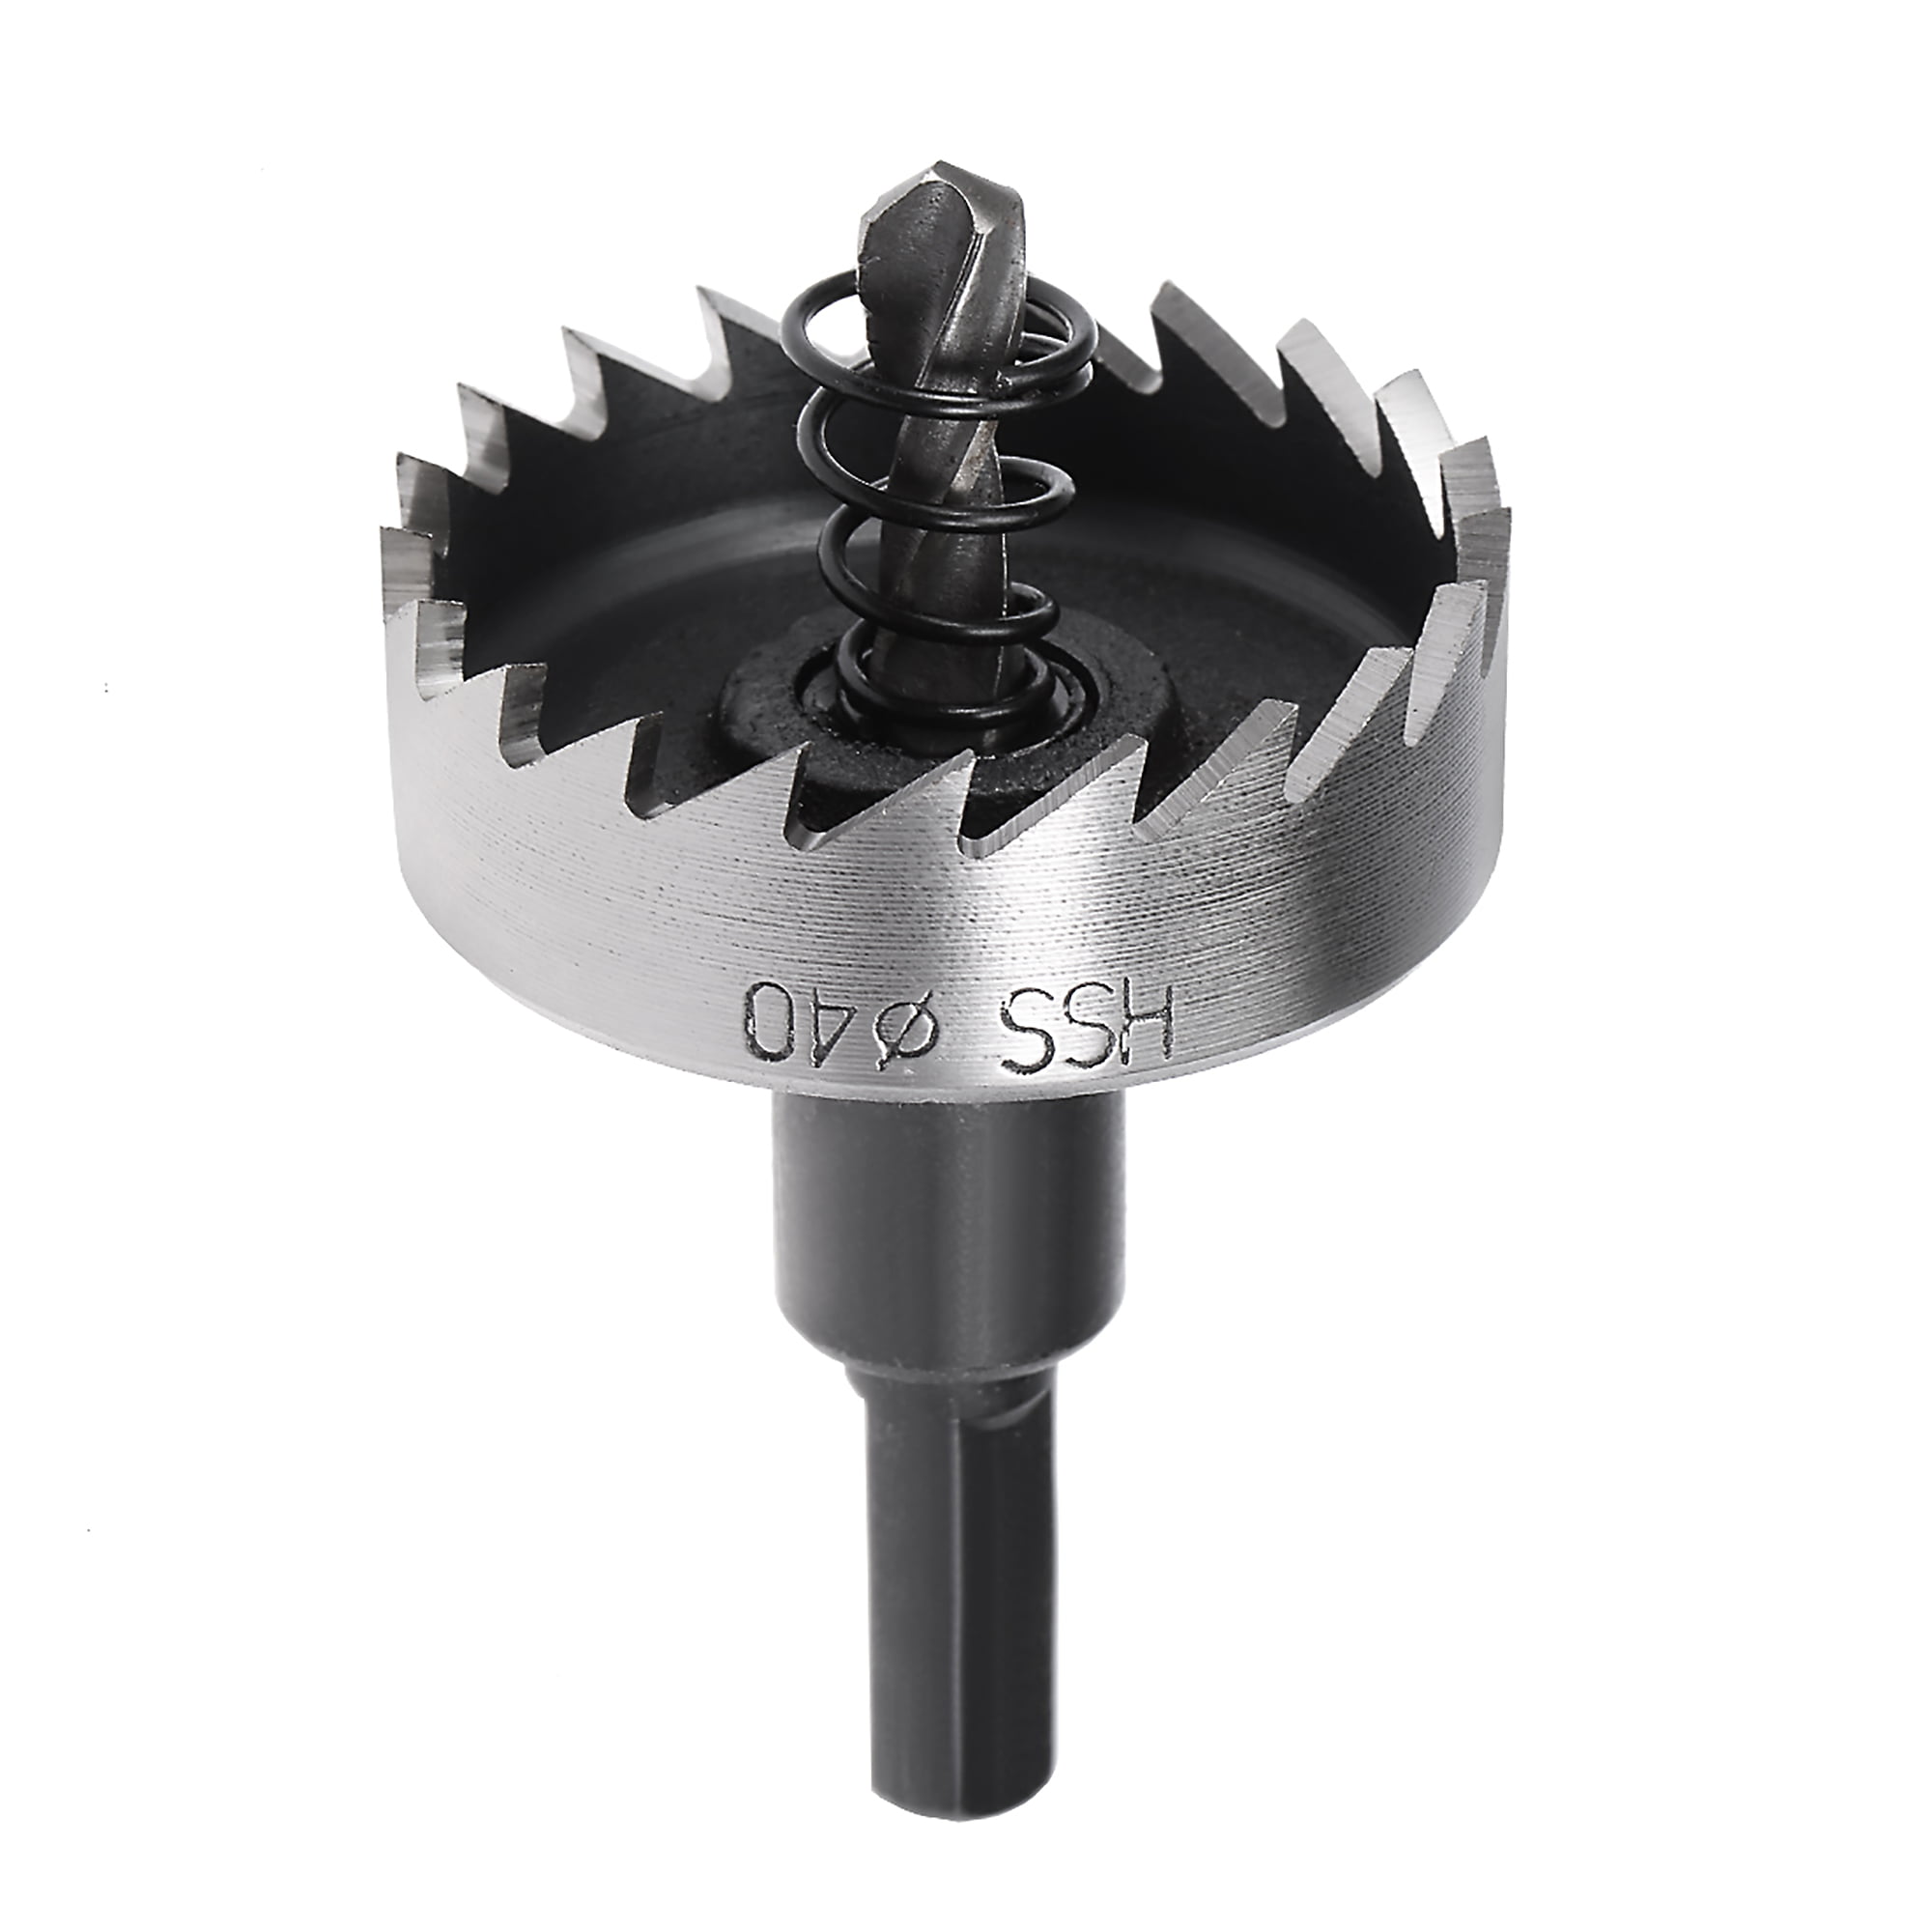 13mm HSS Drill Bit Hole Saw Tooth Stainless Steel Alloy Cutter Cutting Tool 